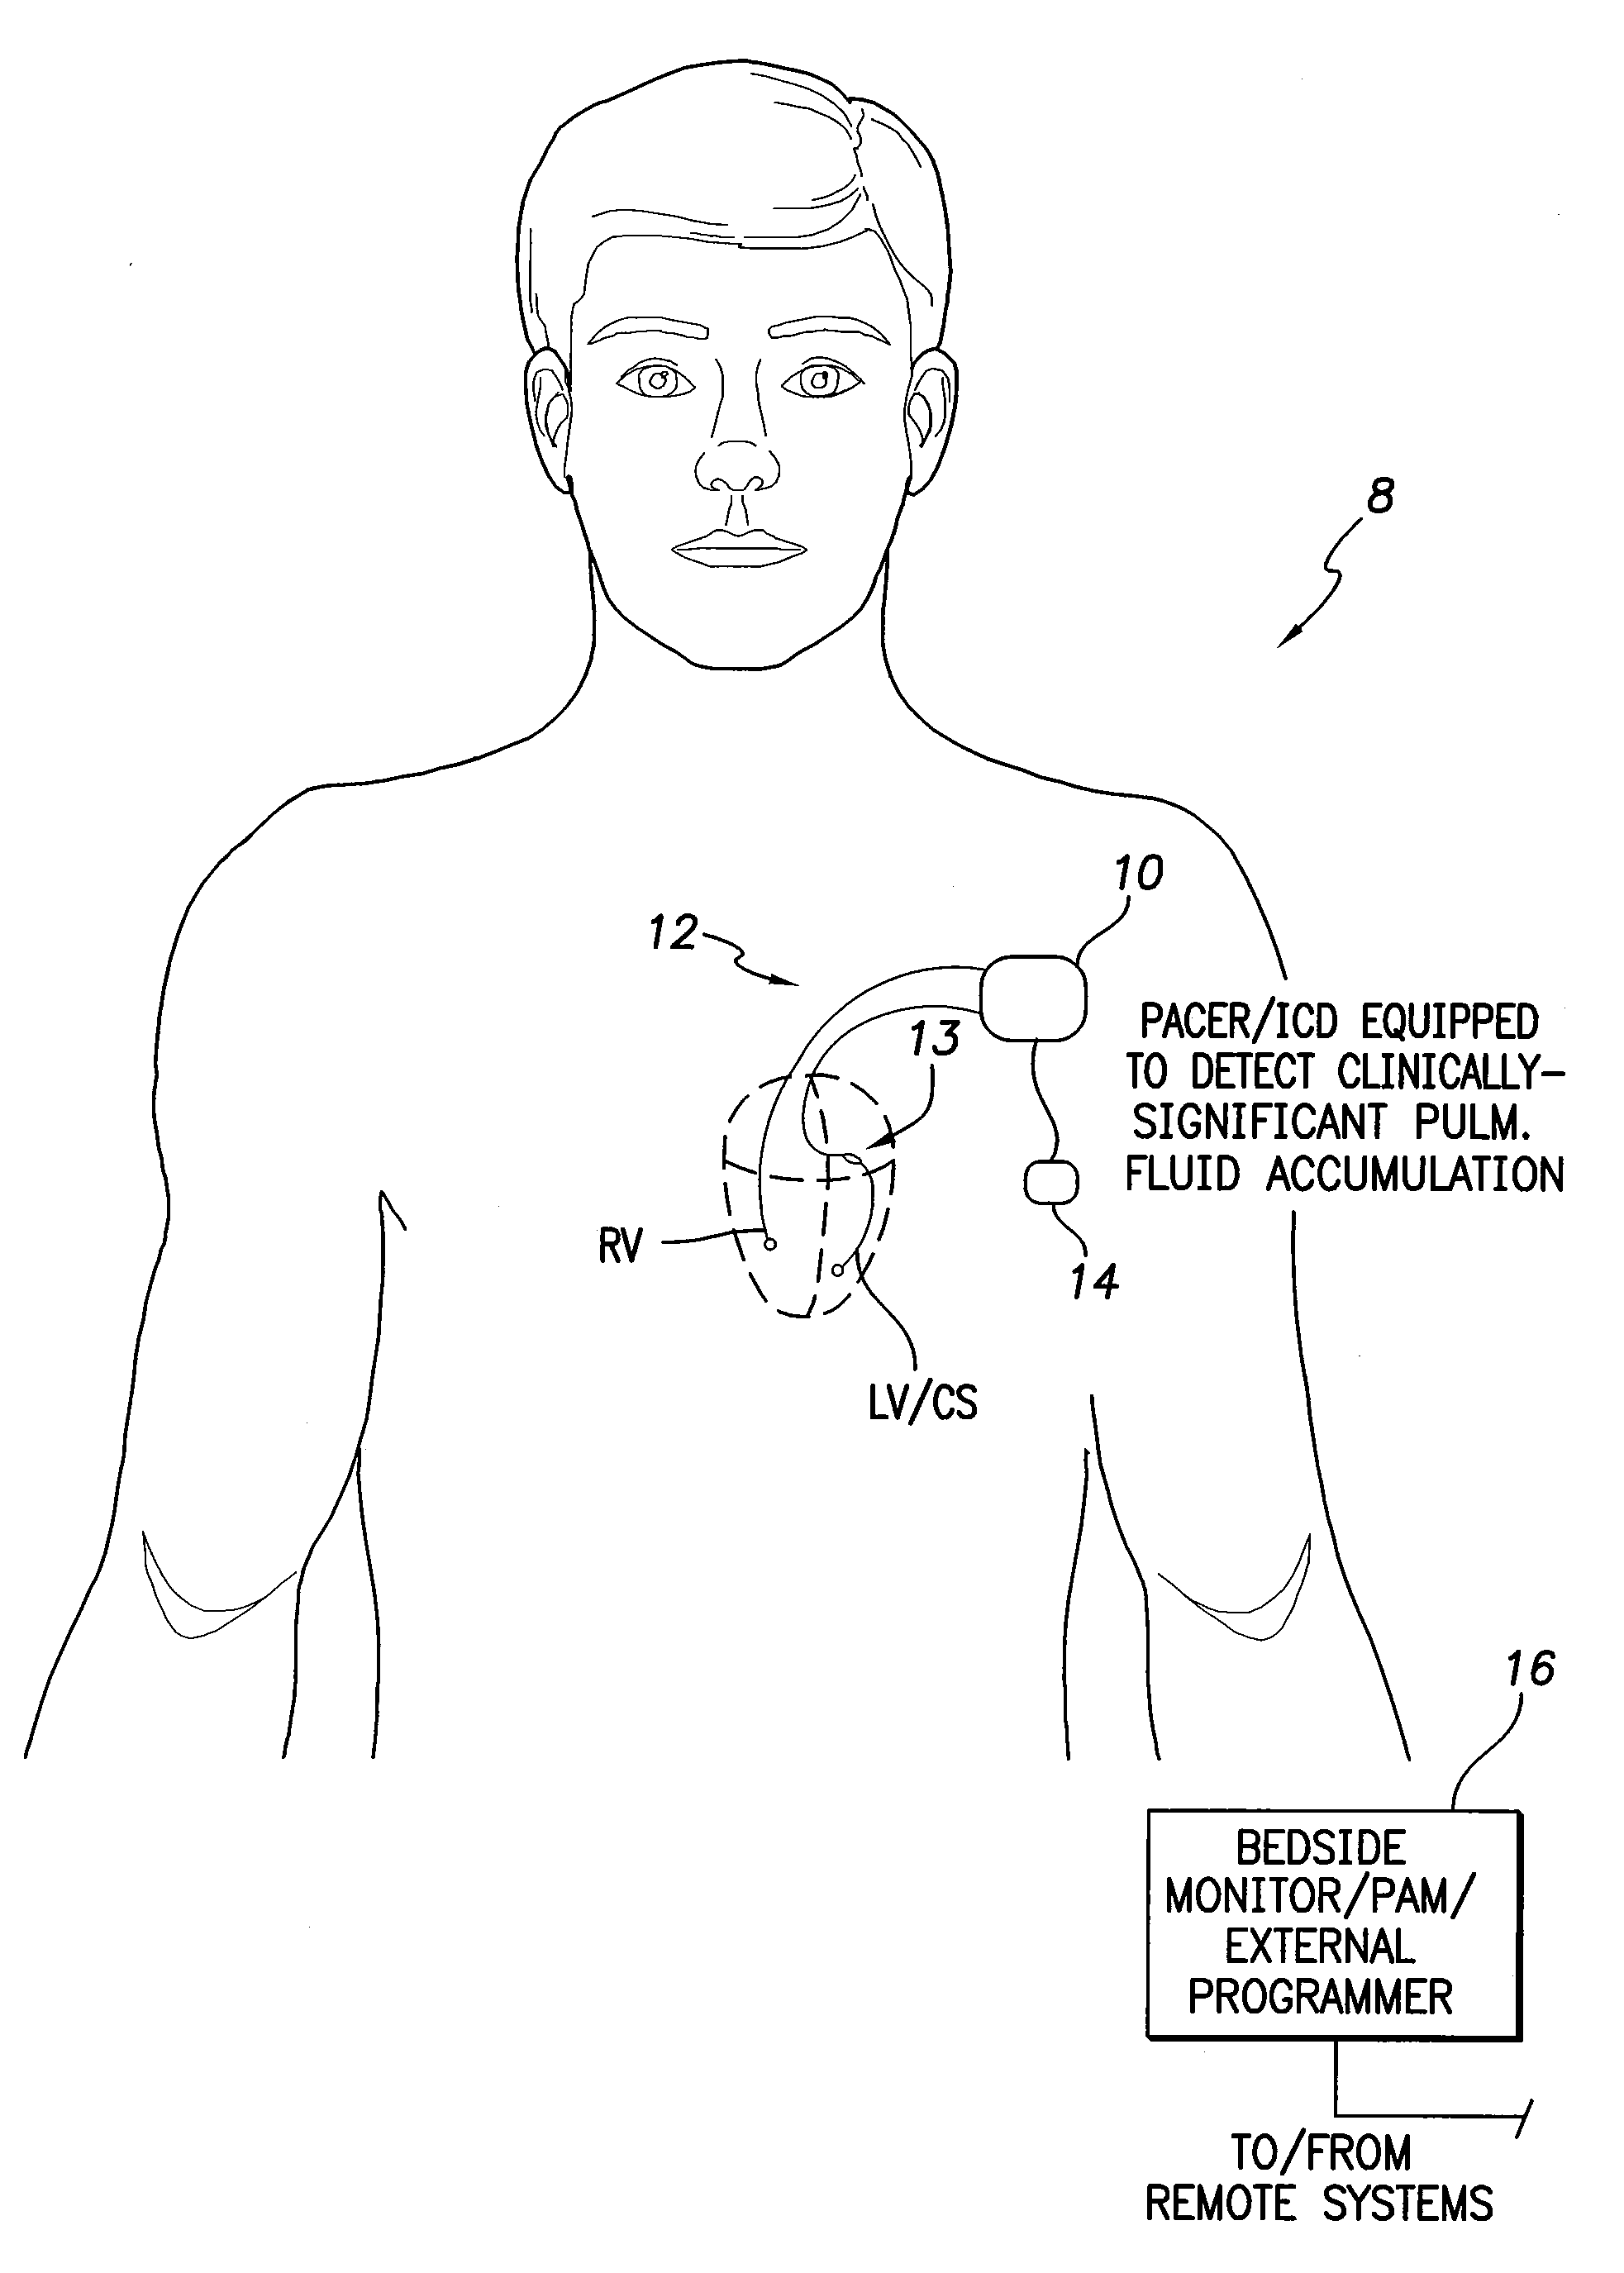 System and Method for Detecting a Clinically-Significant Pulmonary Fluid Accumulation Using an Implantable Medical Device